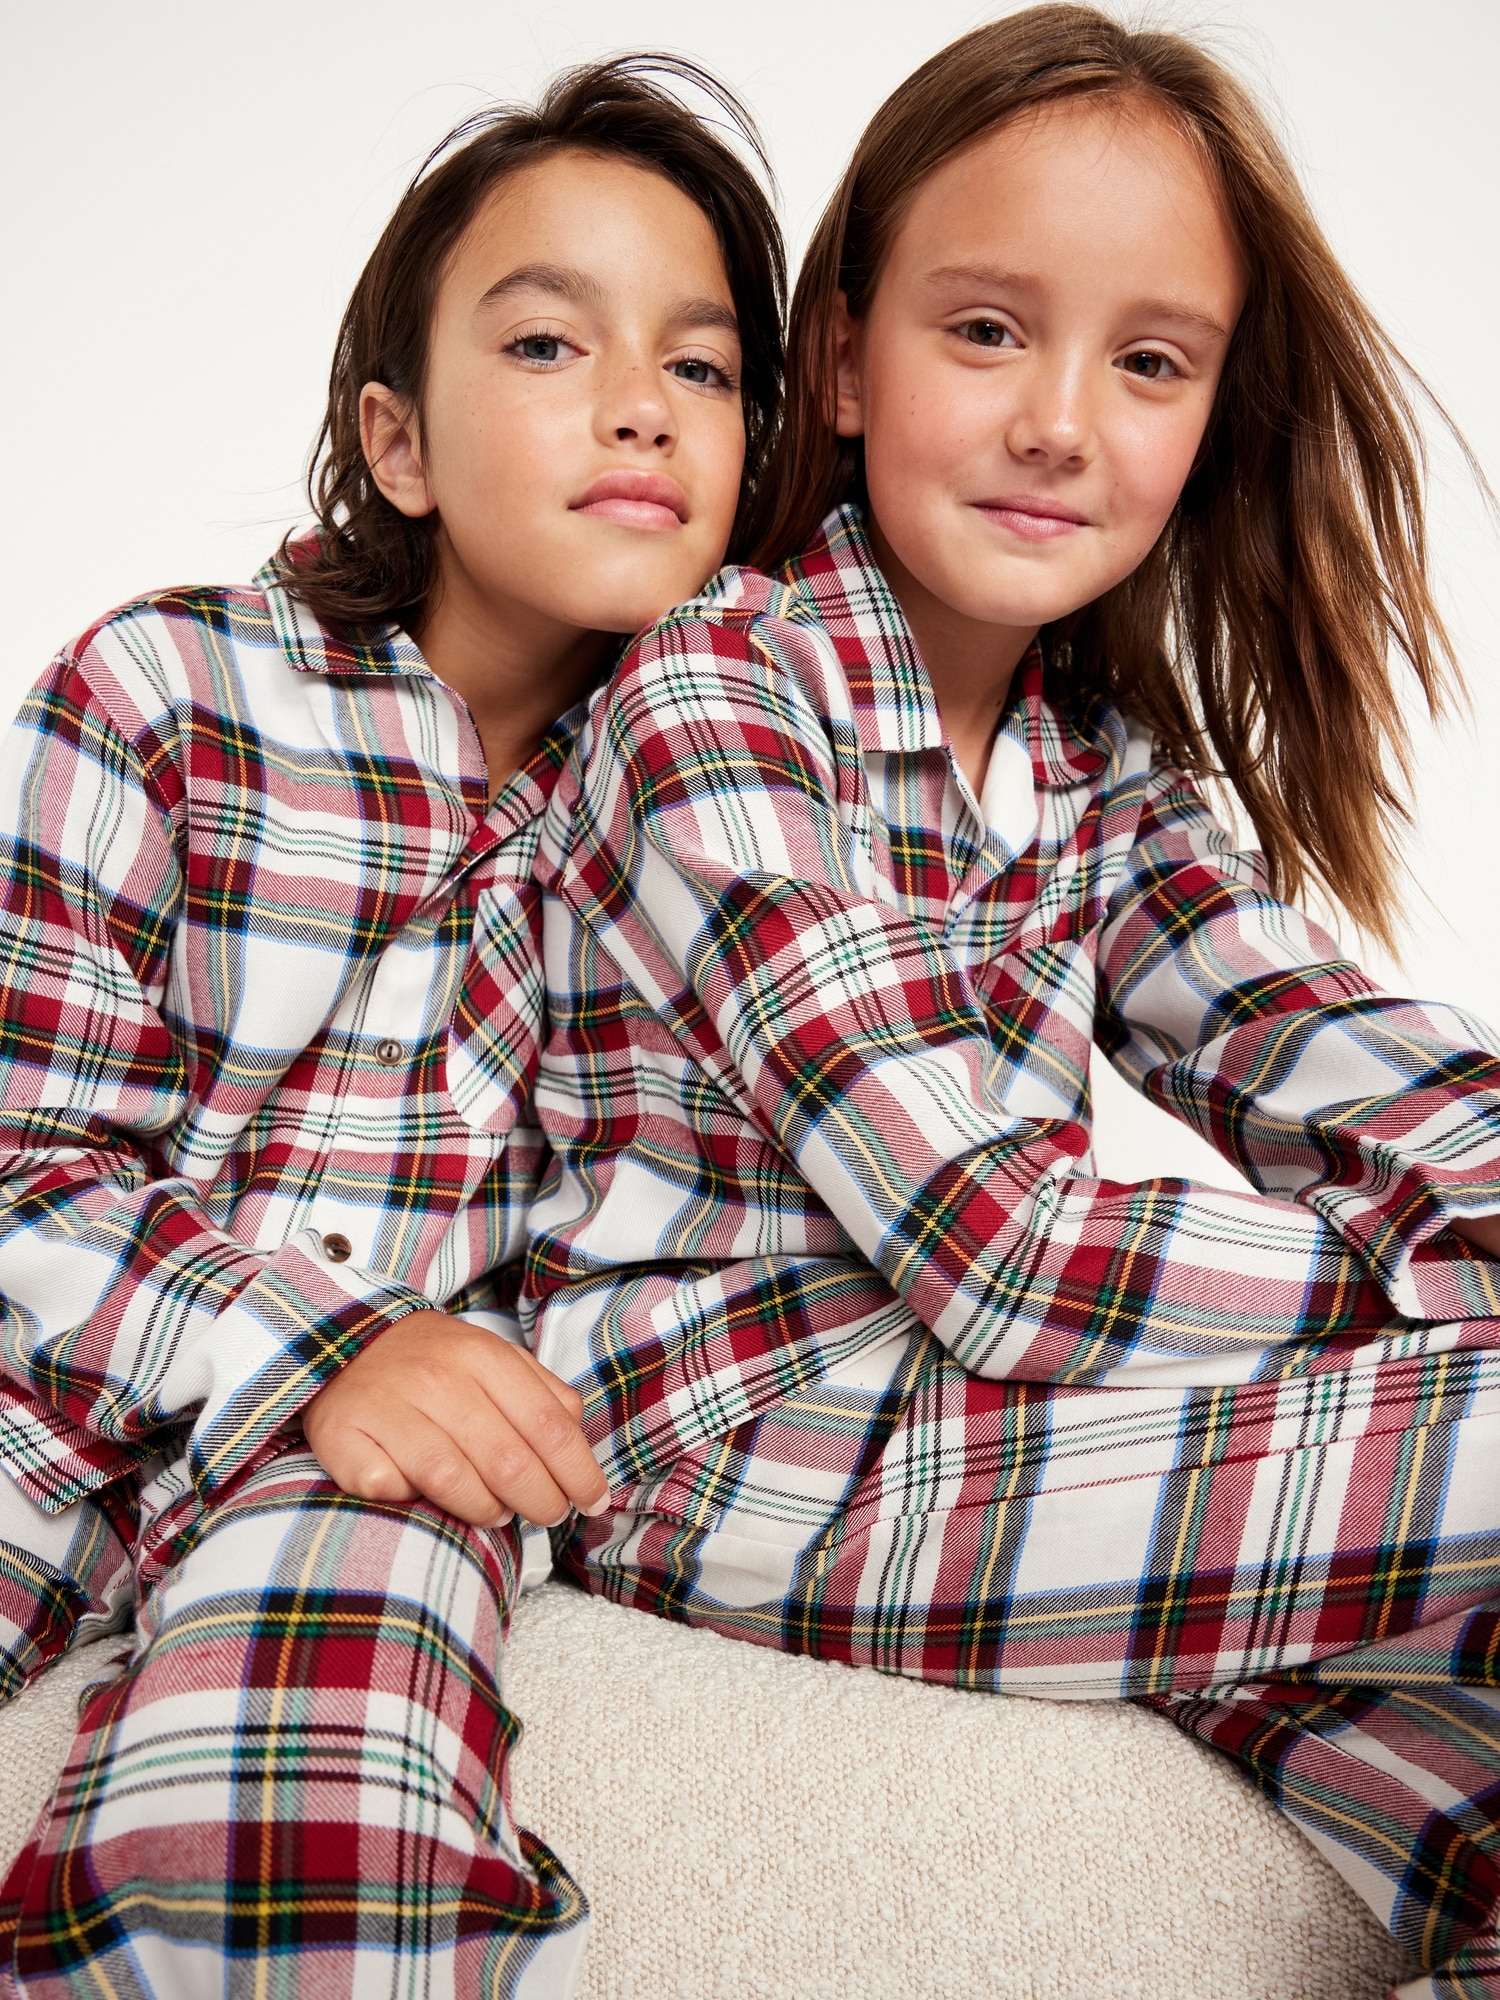 Hanna Andersson Luxe PJs Turned Us Into a Matching-Pajama Kind of